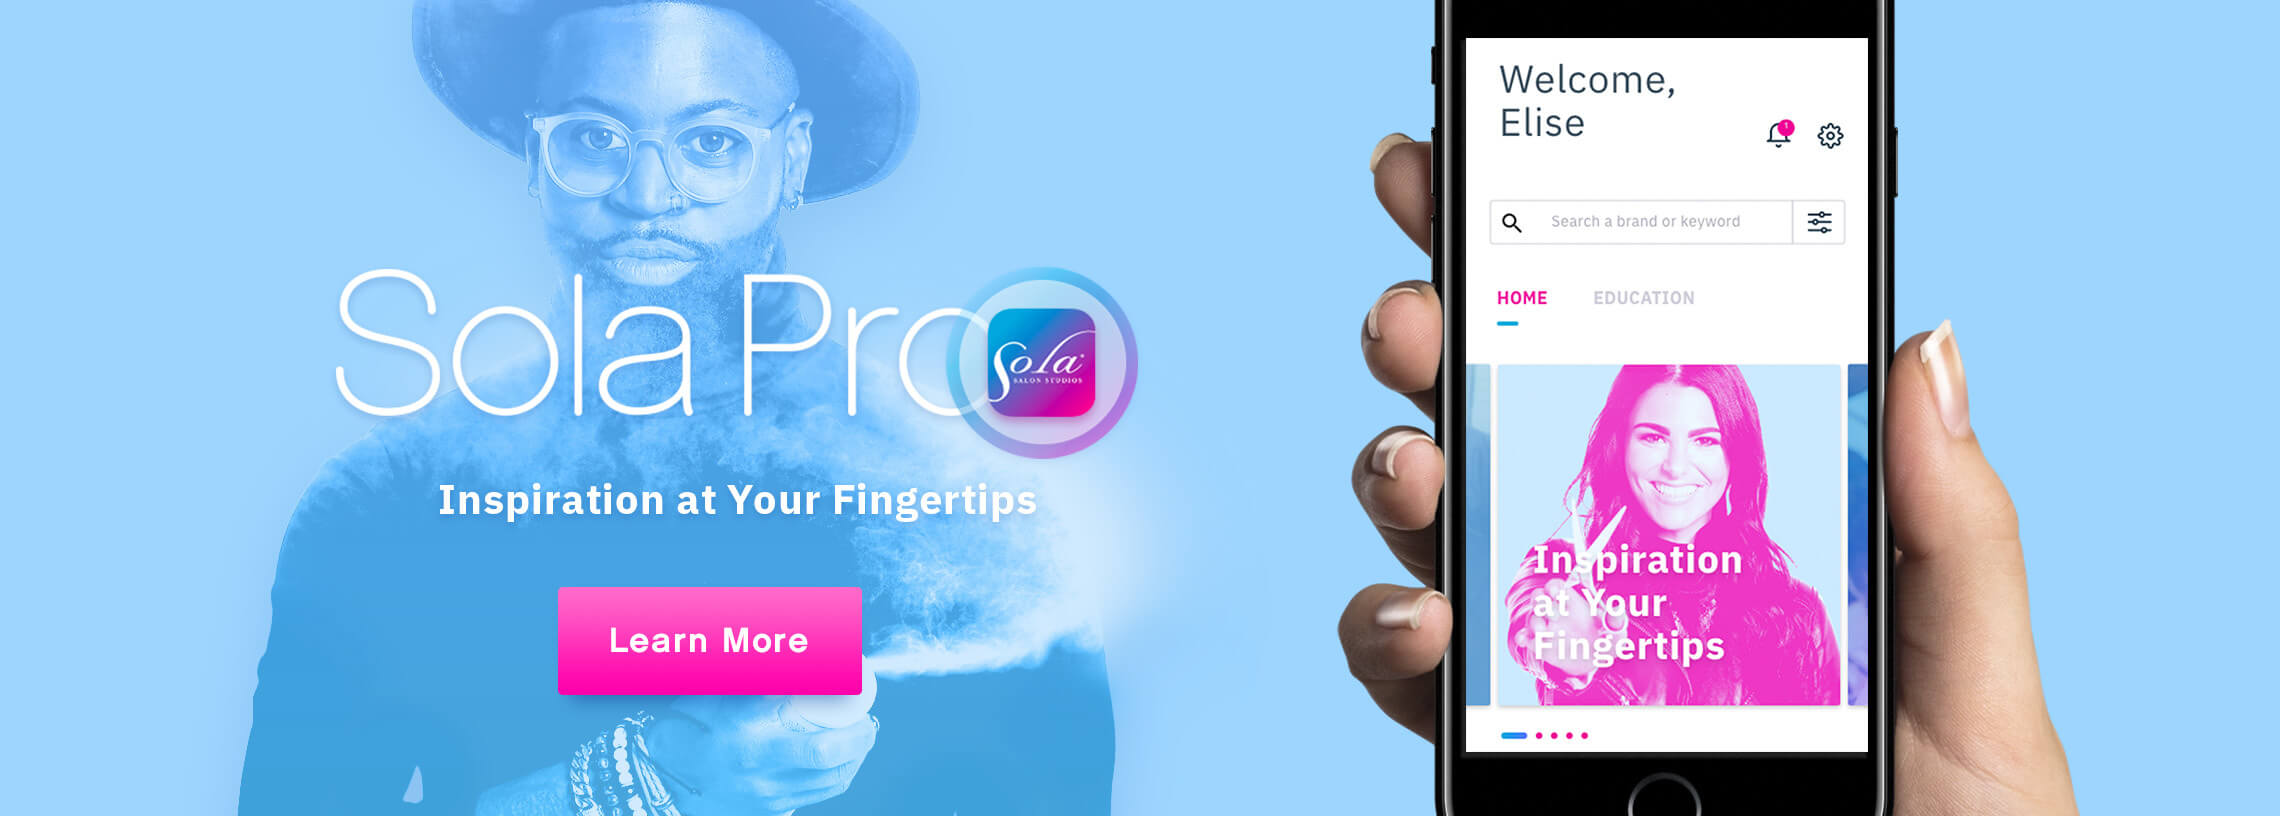 Sola Pro. Inspiration at Your Fingertips. Learn more.